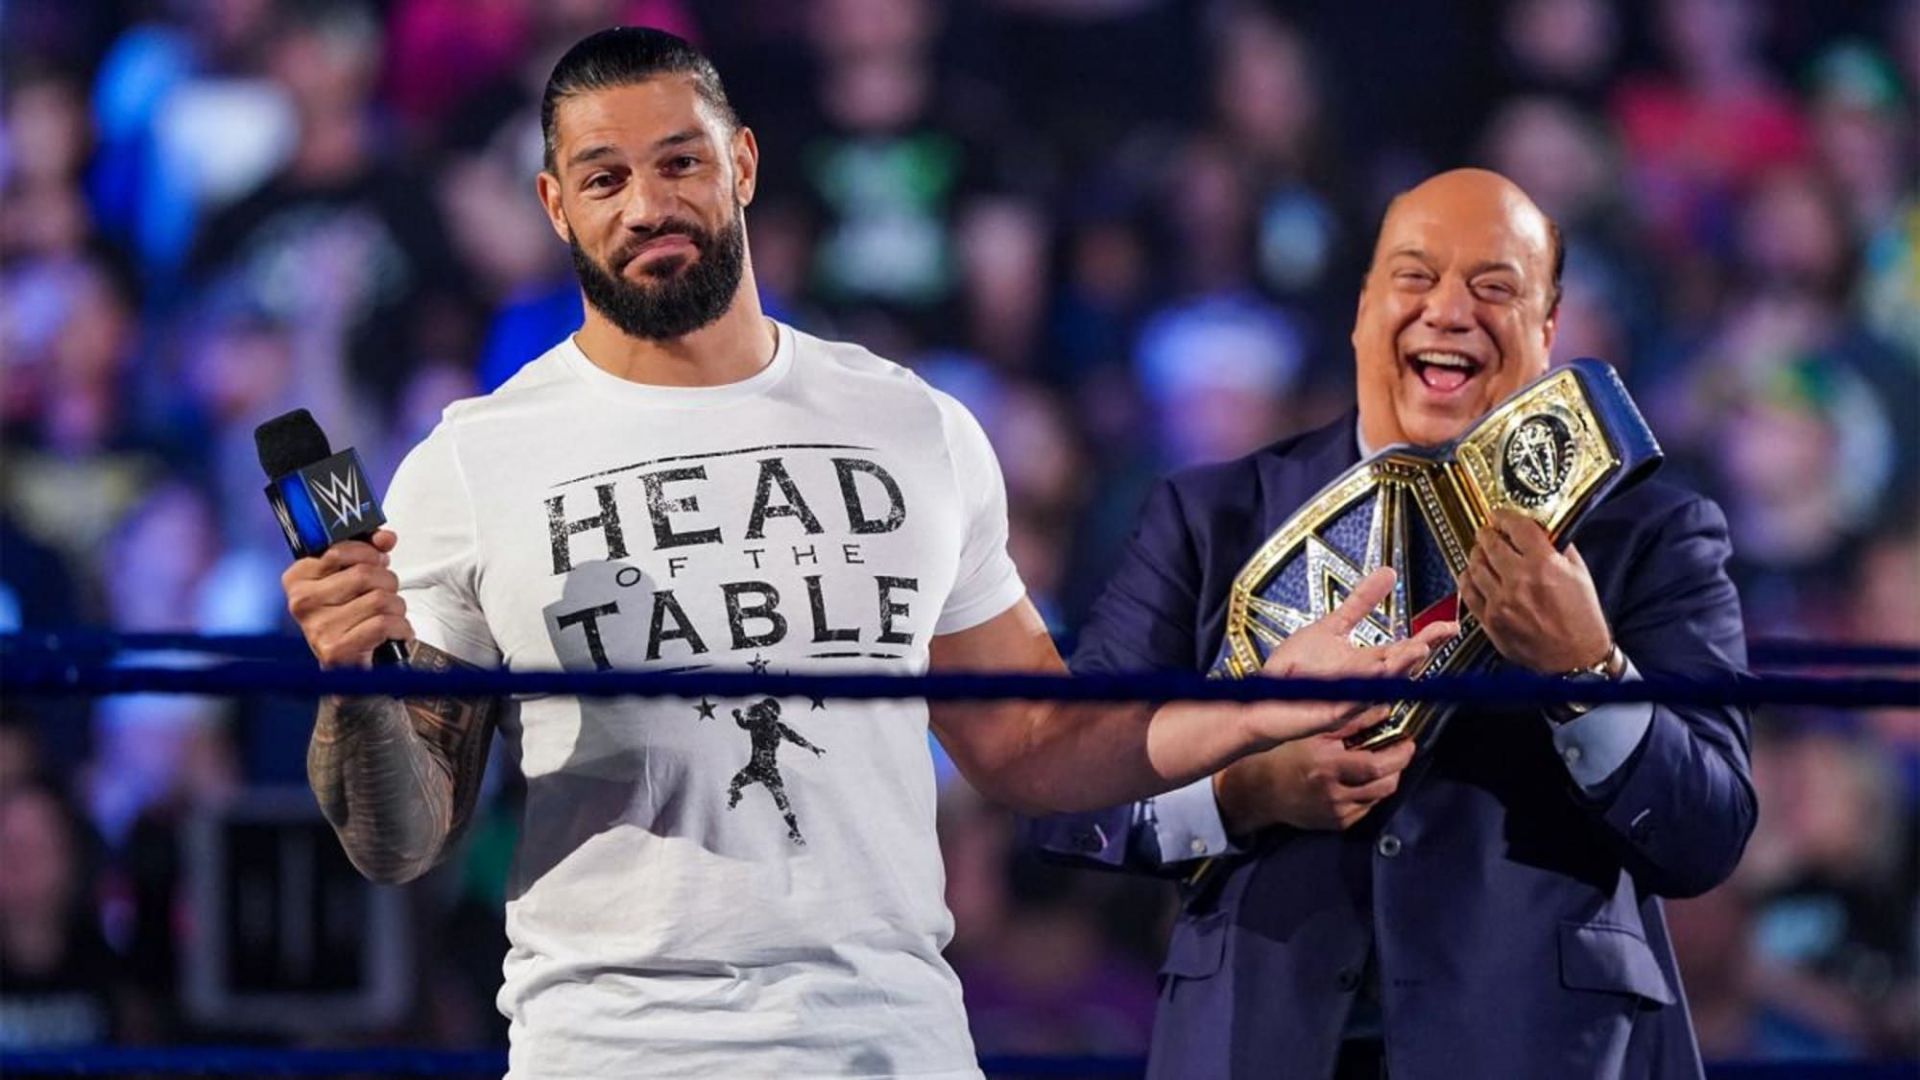 Roman Reigns will be backing The Usos to unify the tag titles this week on SmackDown